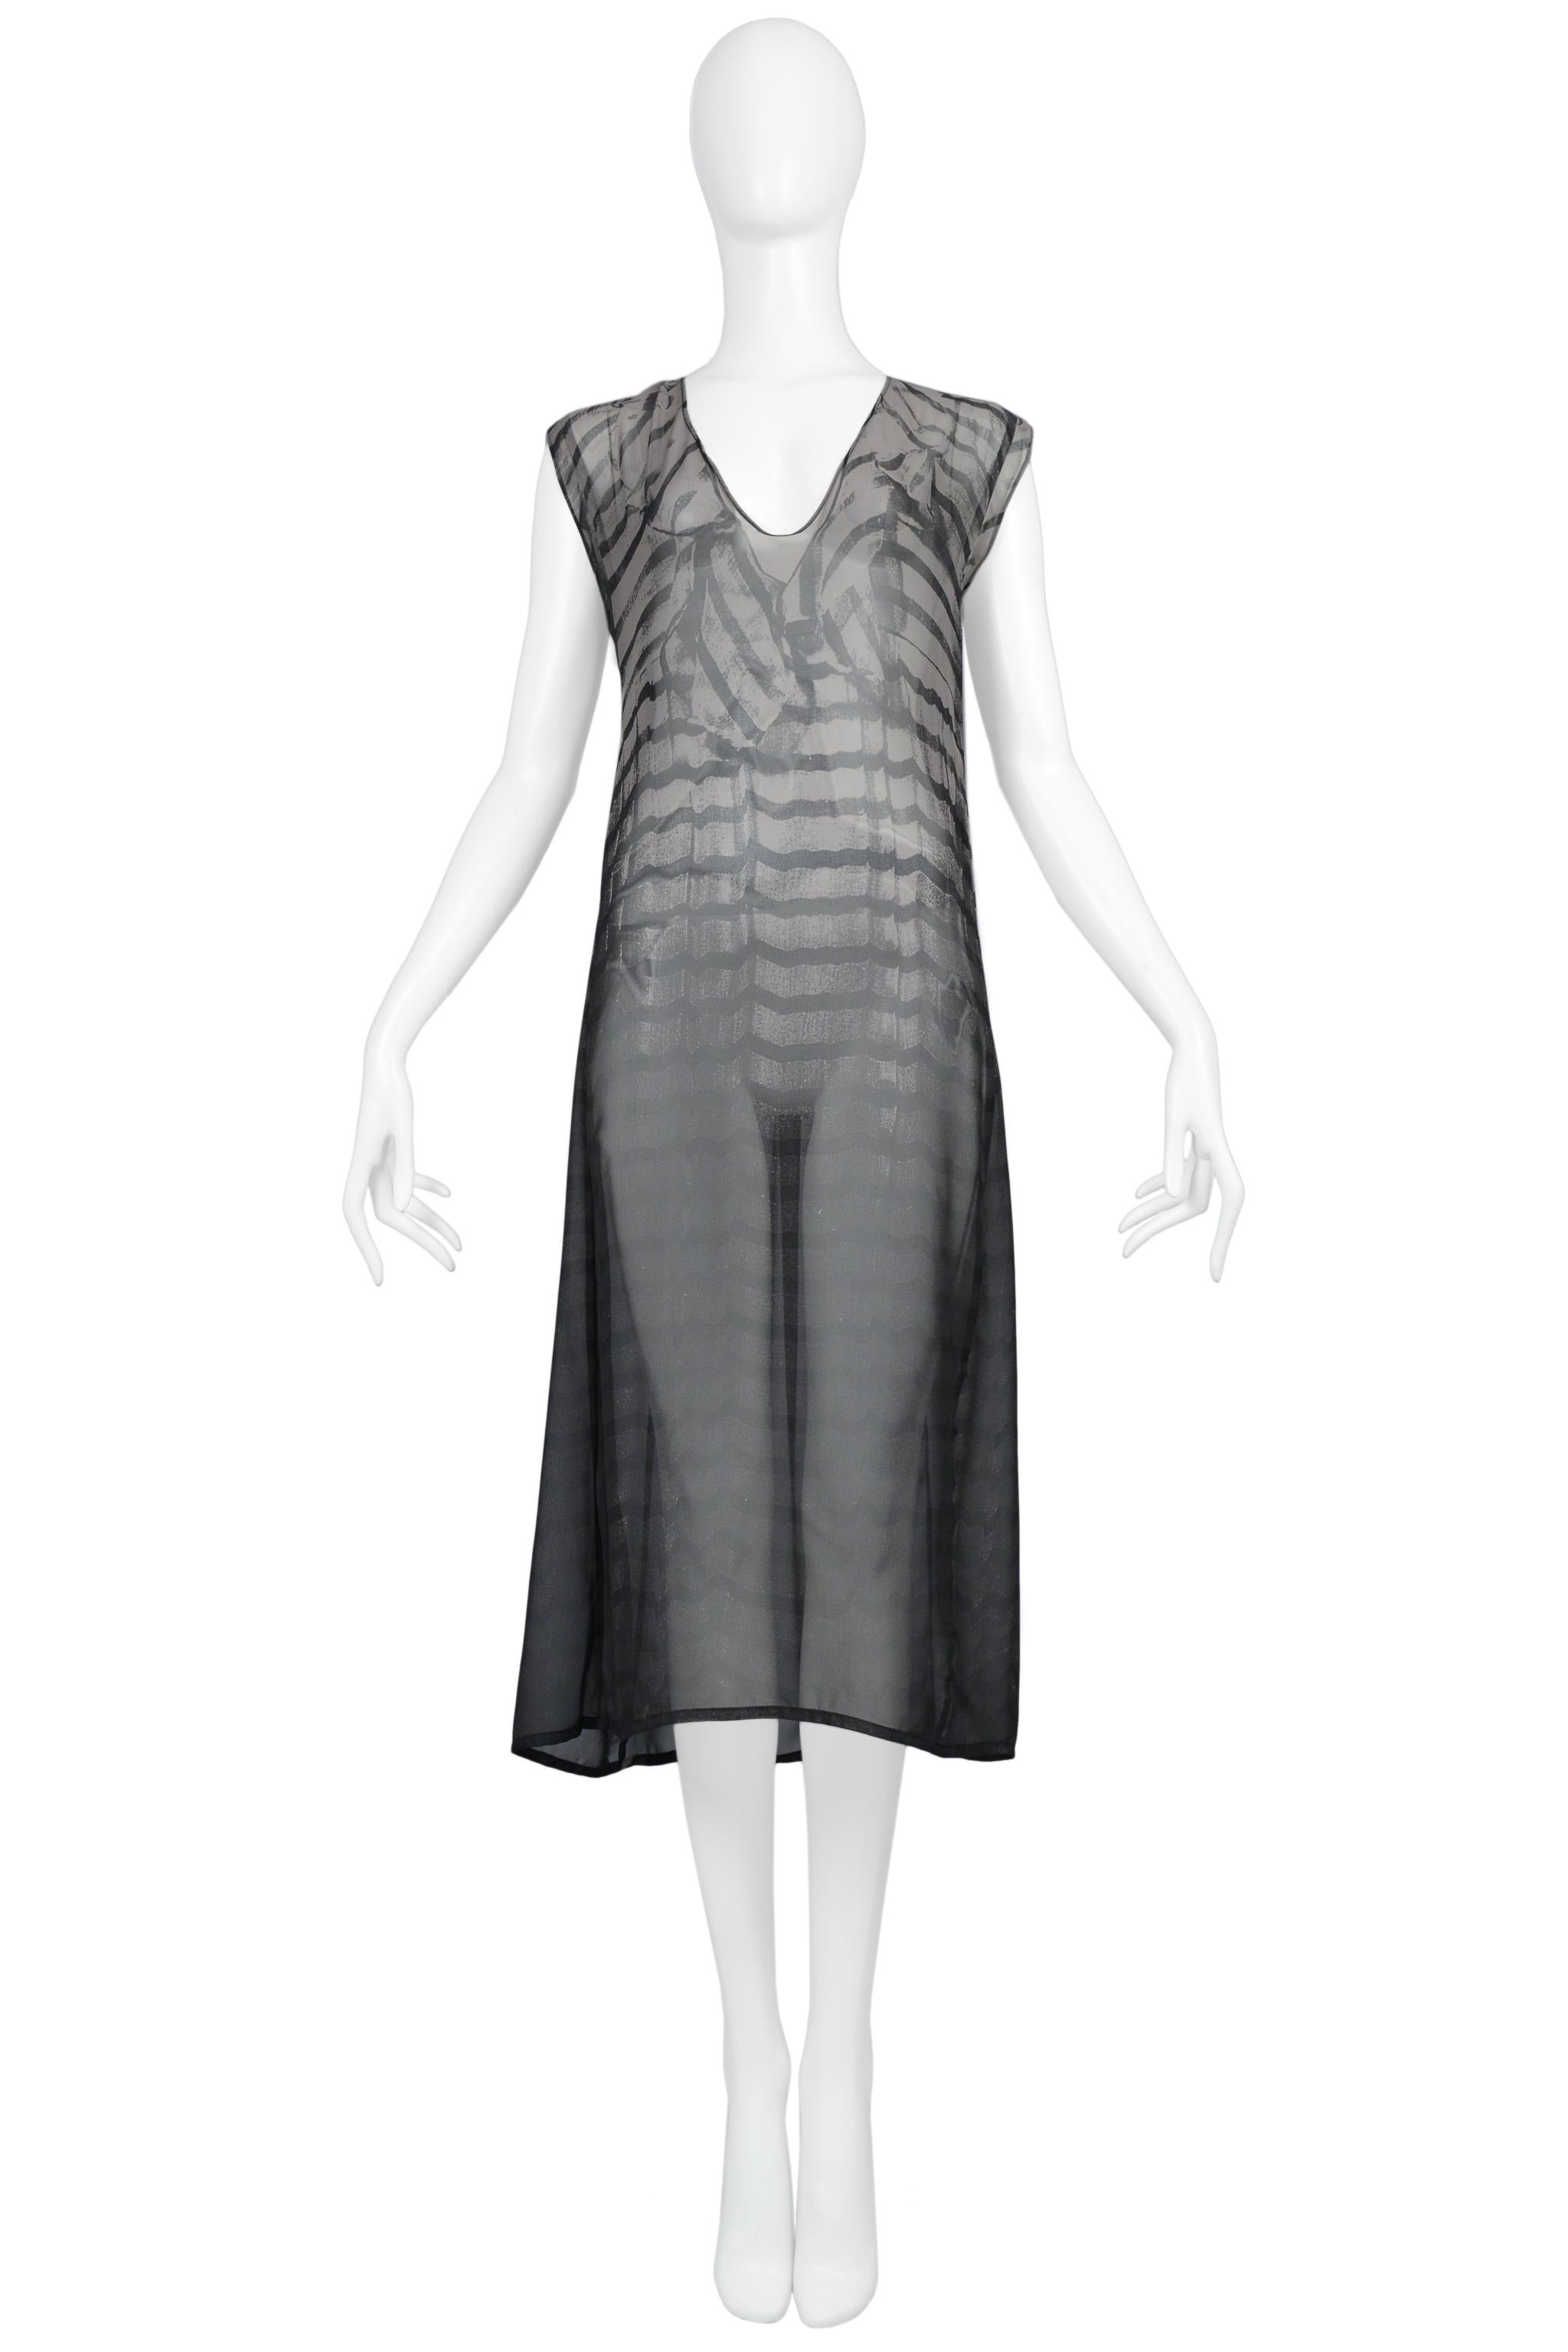 Resurrection Vintage is excited to offer a rare vintage Maison Martin Margiela grey and black striped trompe l'oeil dress print dress featuring a v neck, front and back photo print, and easy body. 

Maison Martin Margiela
One Size 
Sheer Fabric